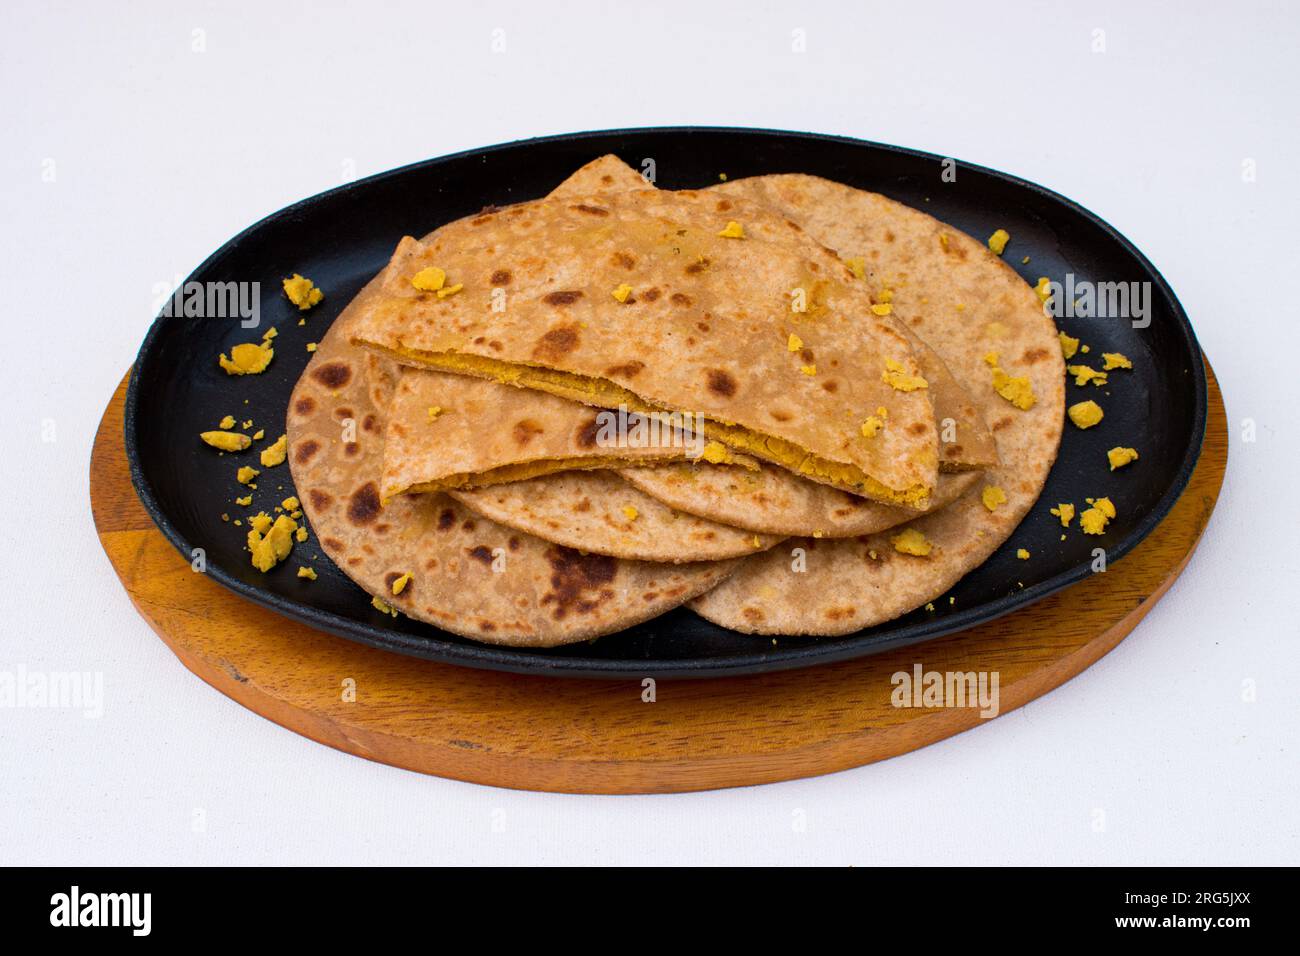 Dal paratha or chana dal stuffed paratha in black plate in white background. Stock Photo